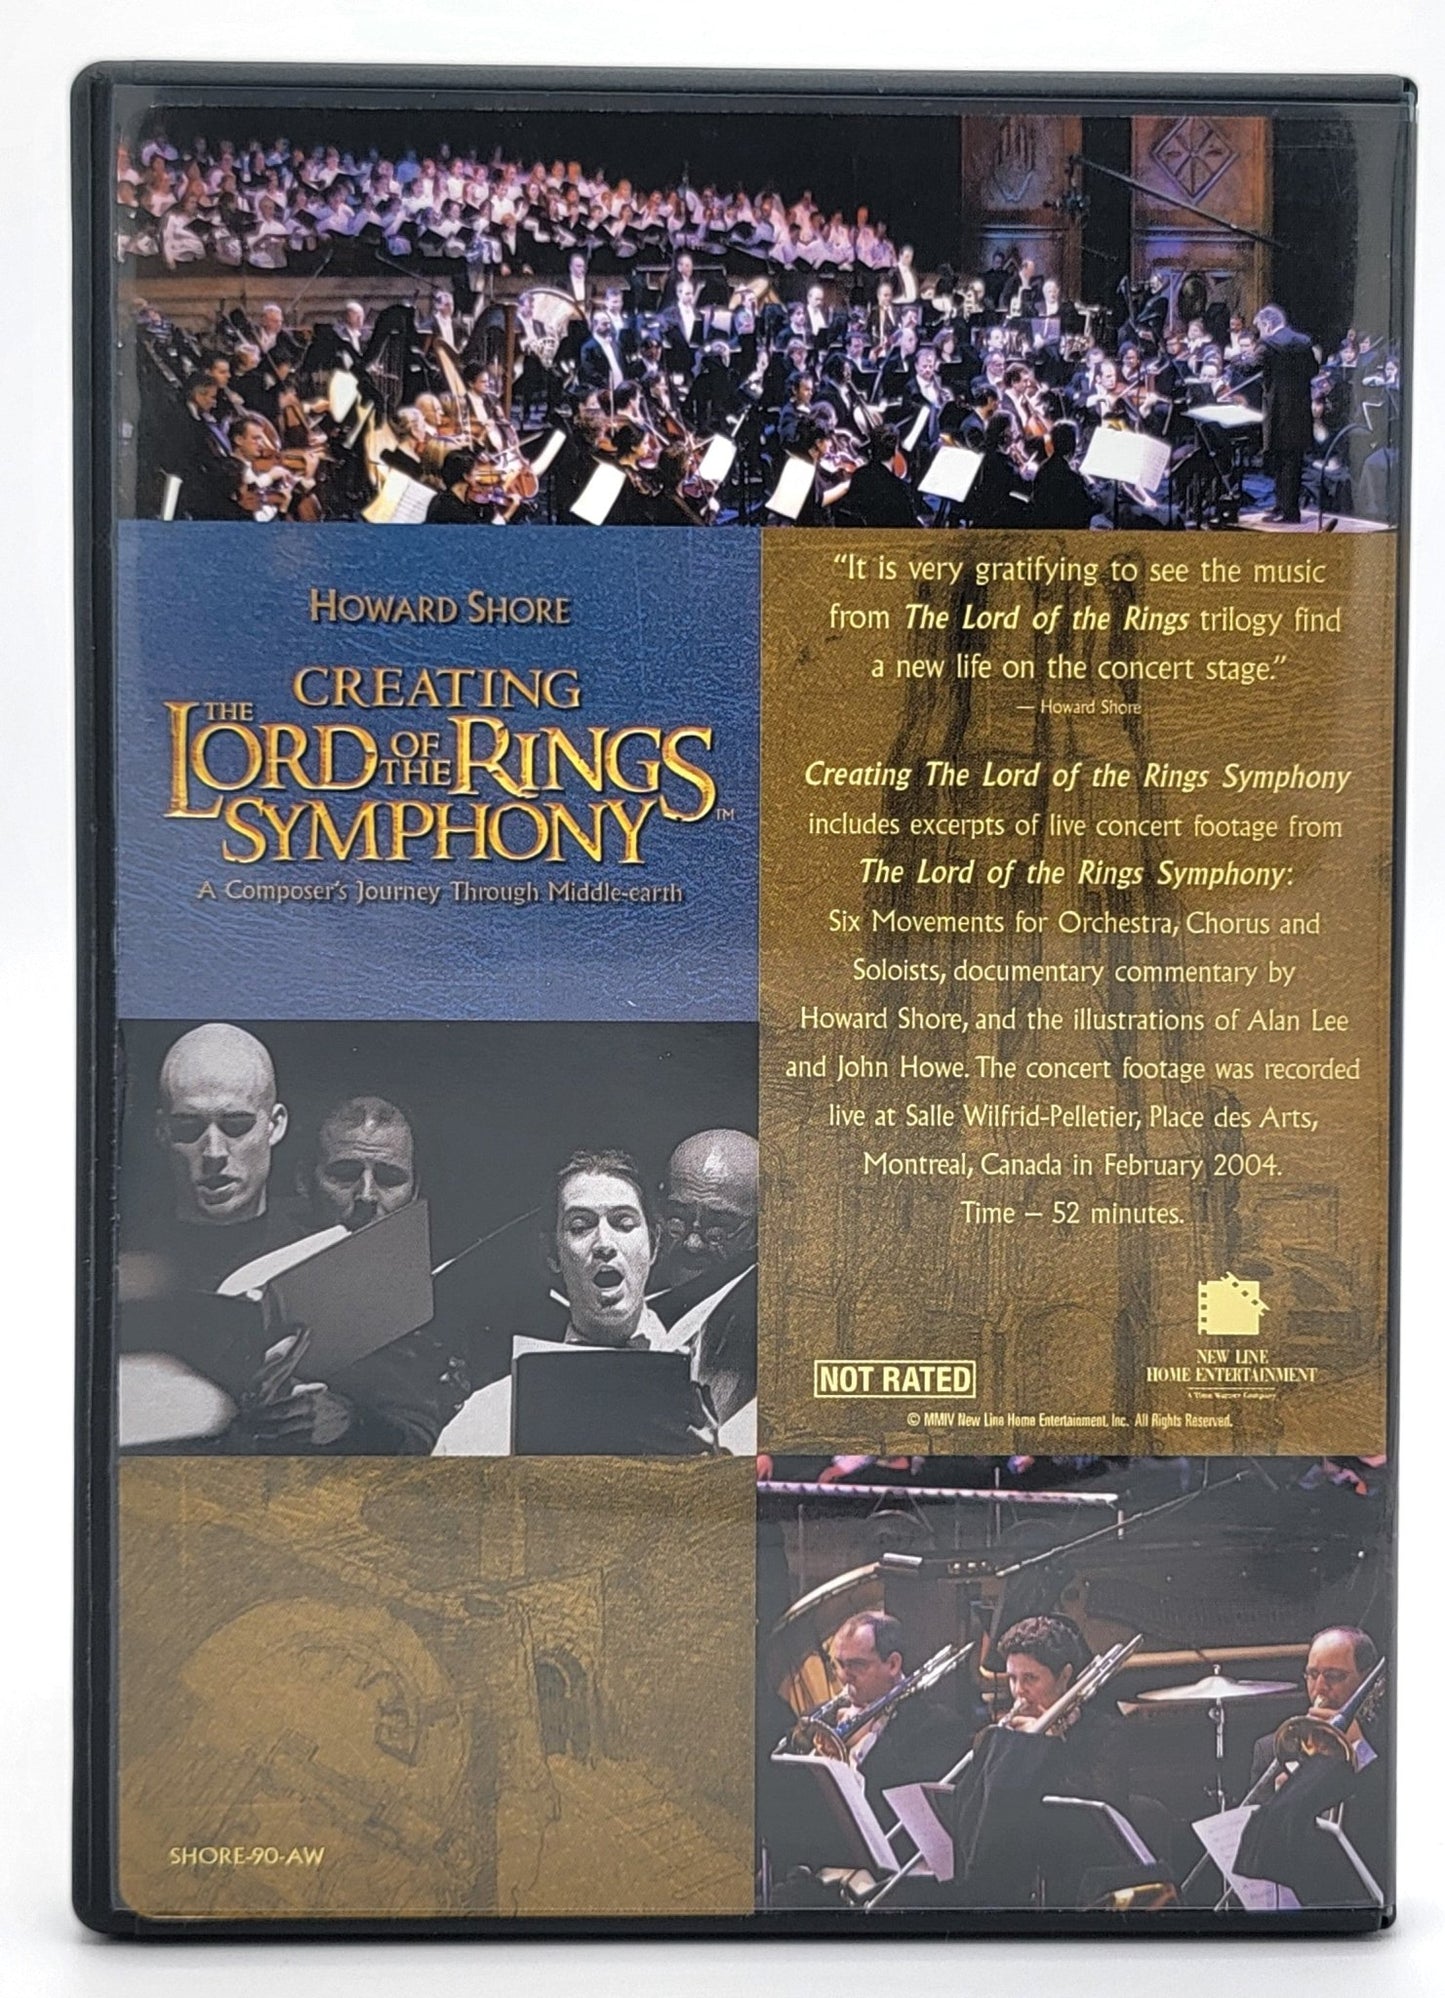 New Line Home Entertainment - Creating The Lord of the Rings Symphony - A Composer's Journey | DVD - DVD - Steady Bunny Shop